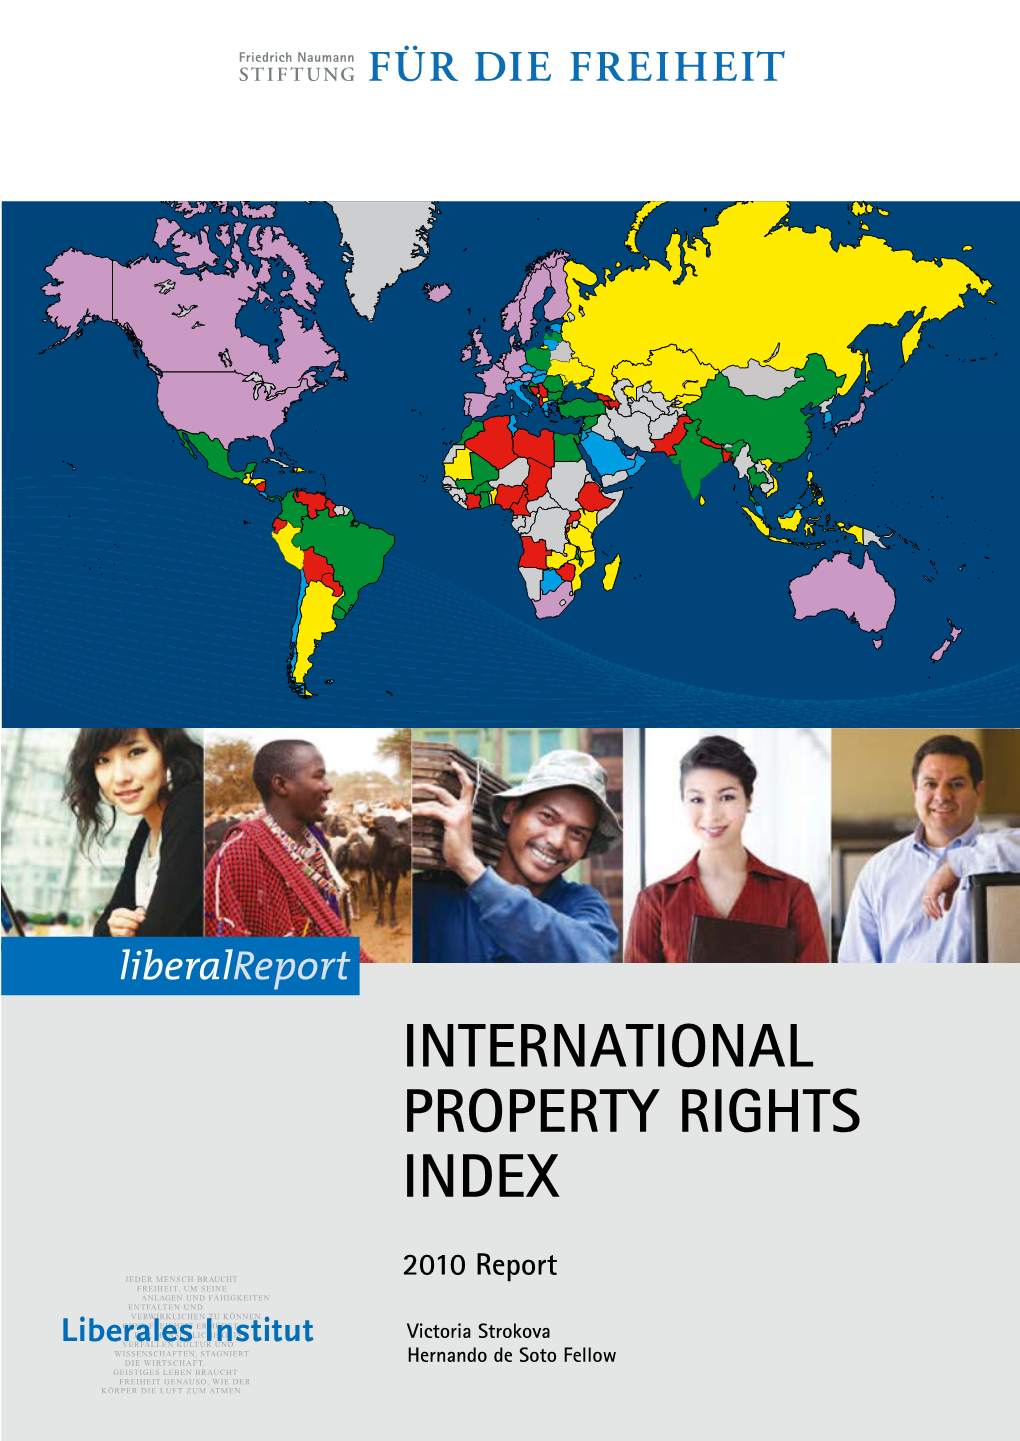 International Property Rights Index (IPRI) Is the Flagship Publication of the Property Rights Alliance (PRA)